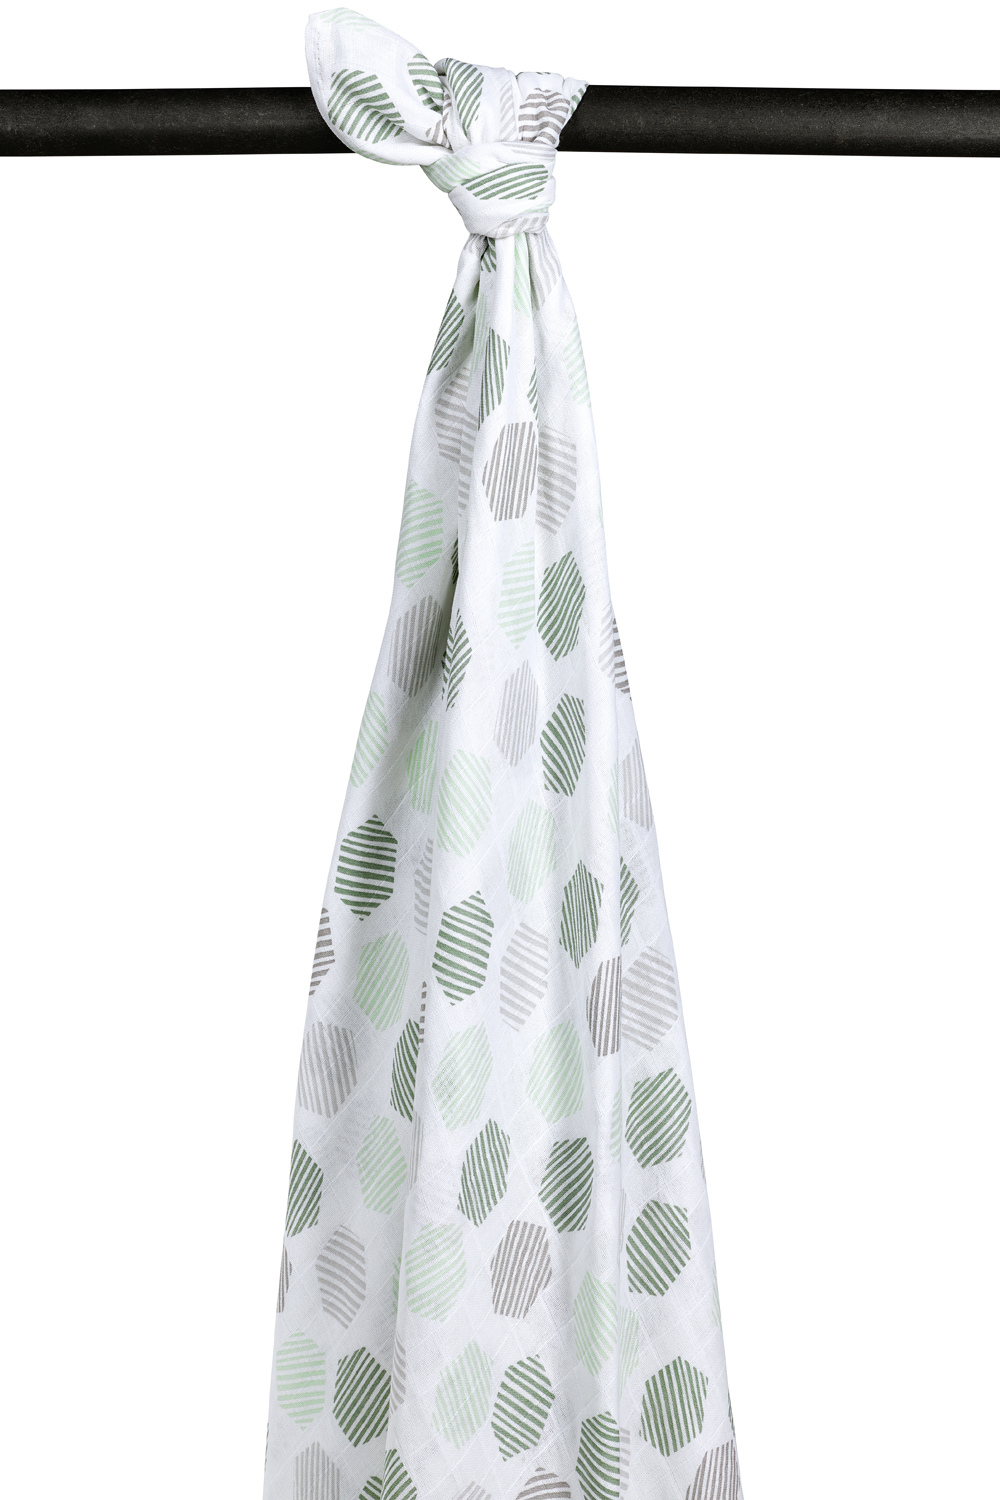 Swaddle XL Honeycomb - Forest Green - 140x200cm